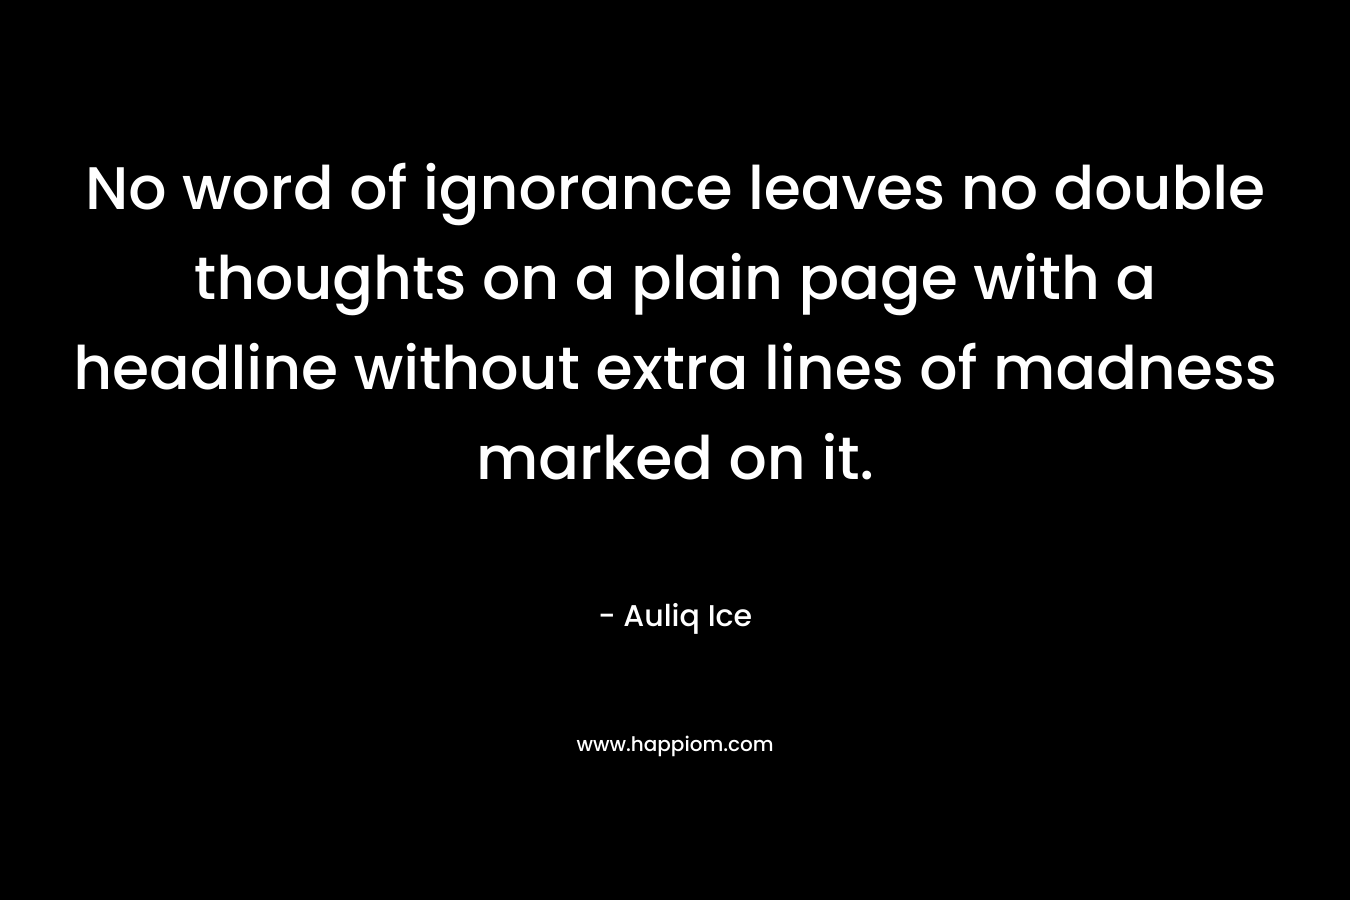 No word of ignorance leaves no double thoughts on a plain page with a headline without extra lines of madness marked on it. – Auliq Ice